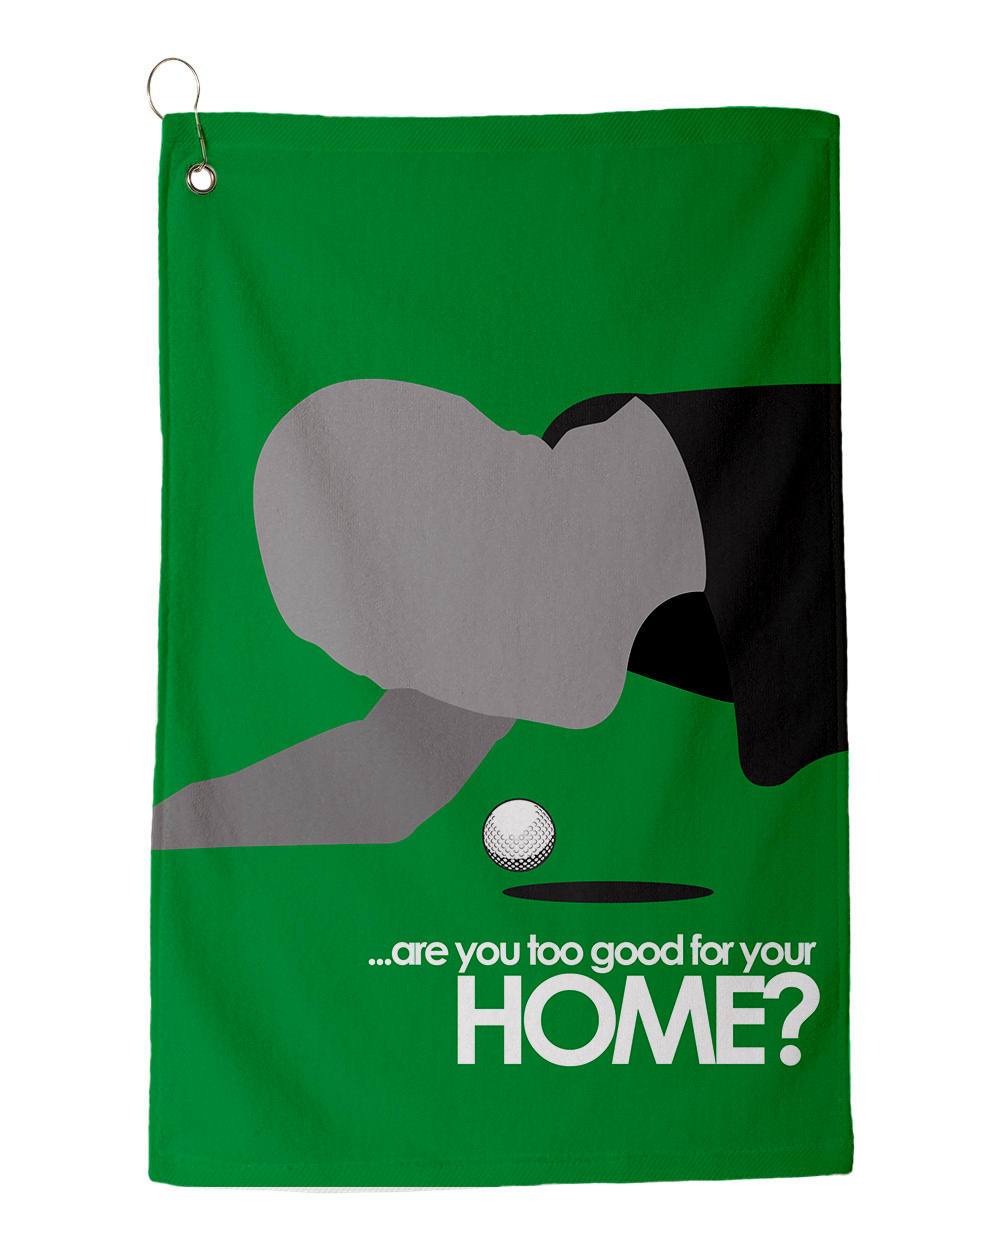 Are you too good for your HOME? - Golf Towel 18" x 30" Dye Sublimated Towels